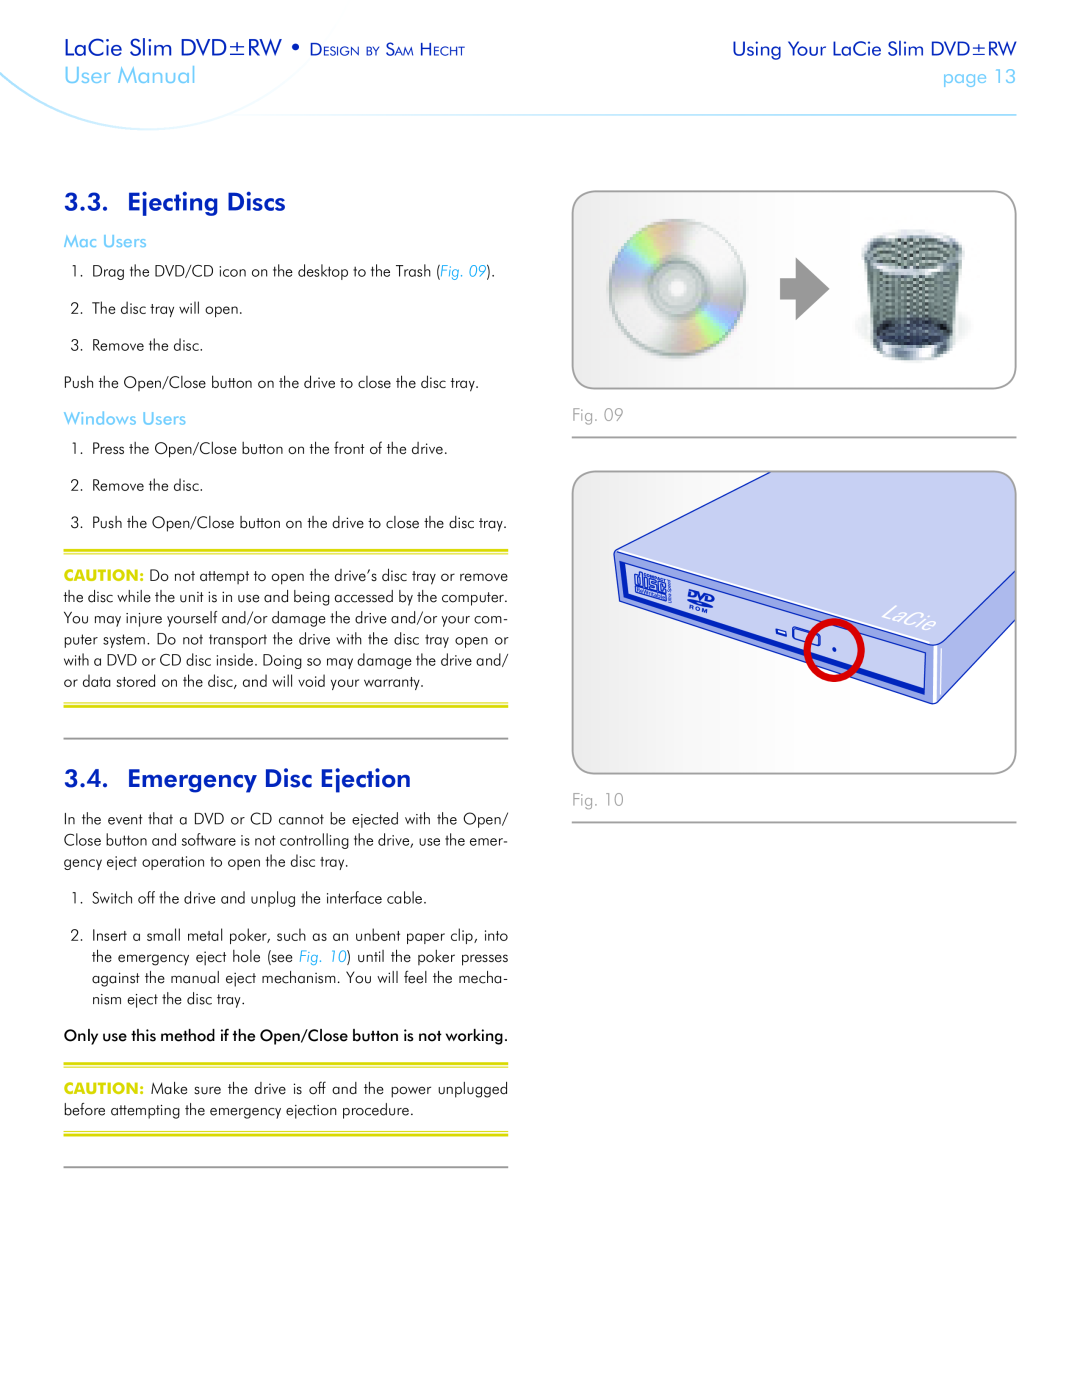 LaCie 301910 Ejecting Discs, Emergency Disc Ejection, LaCie Slim DVD±RW Design by Sam Hecht User Manual, page, Mac Users 